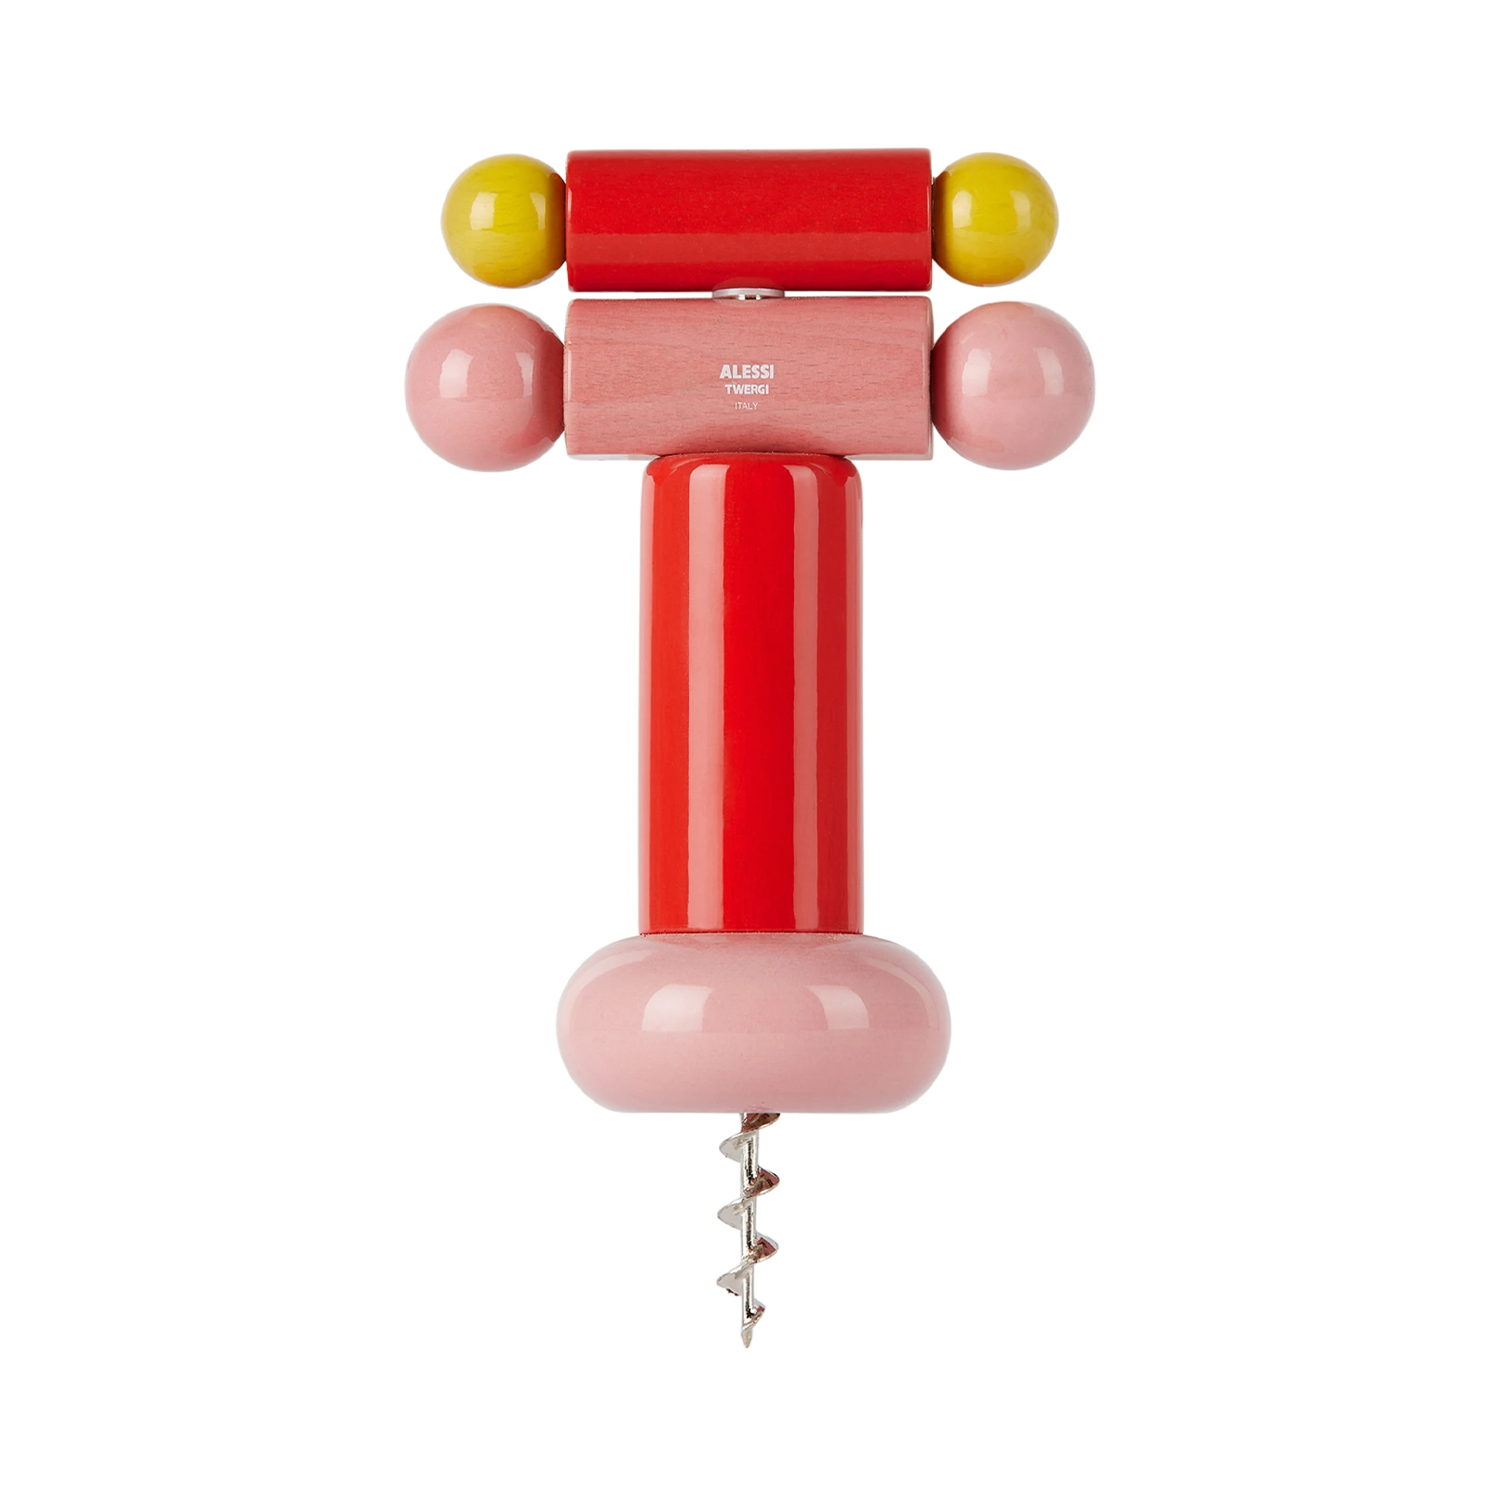 Alessi Corkscrew in red and yellow